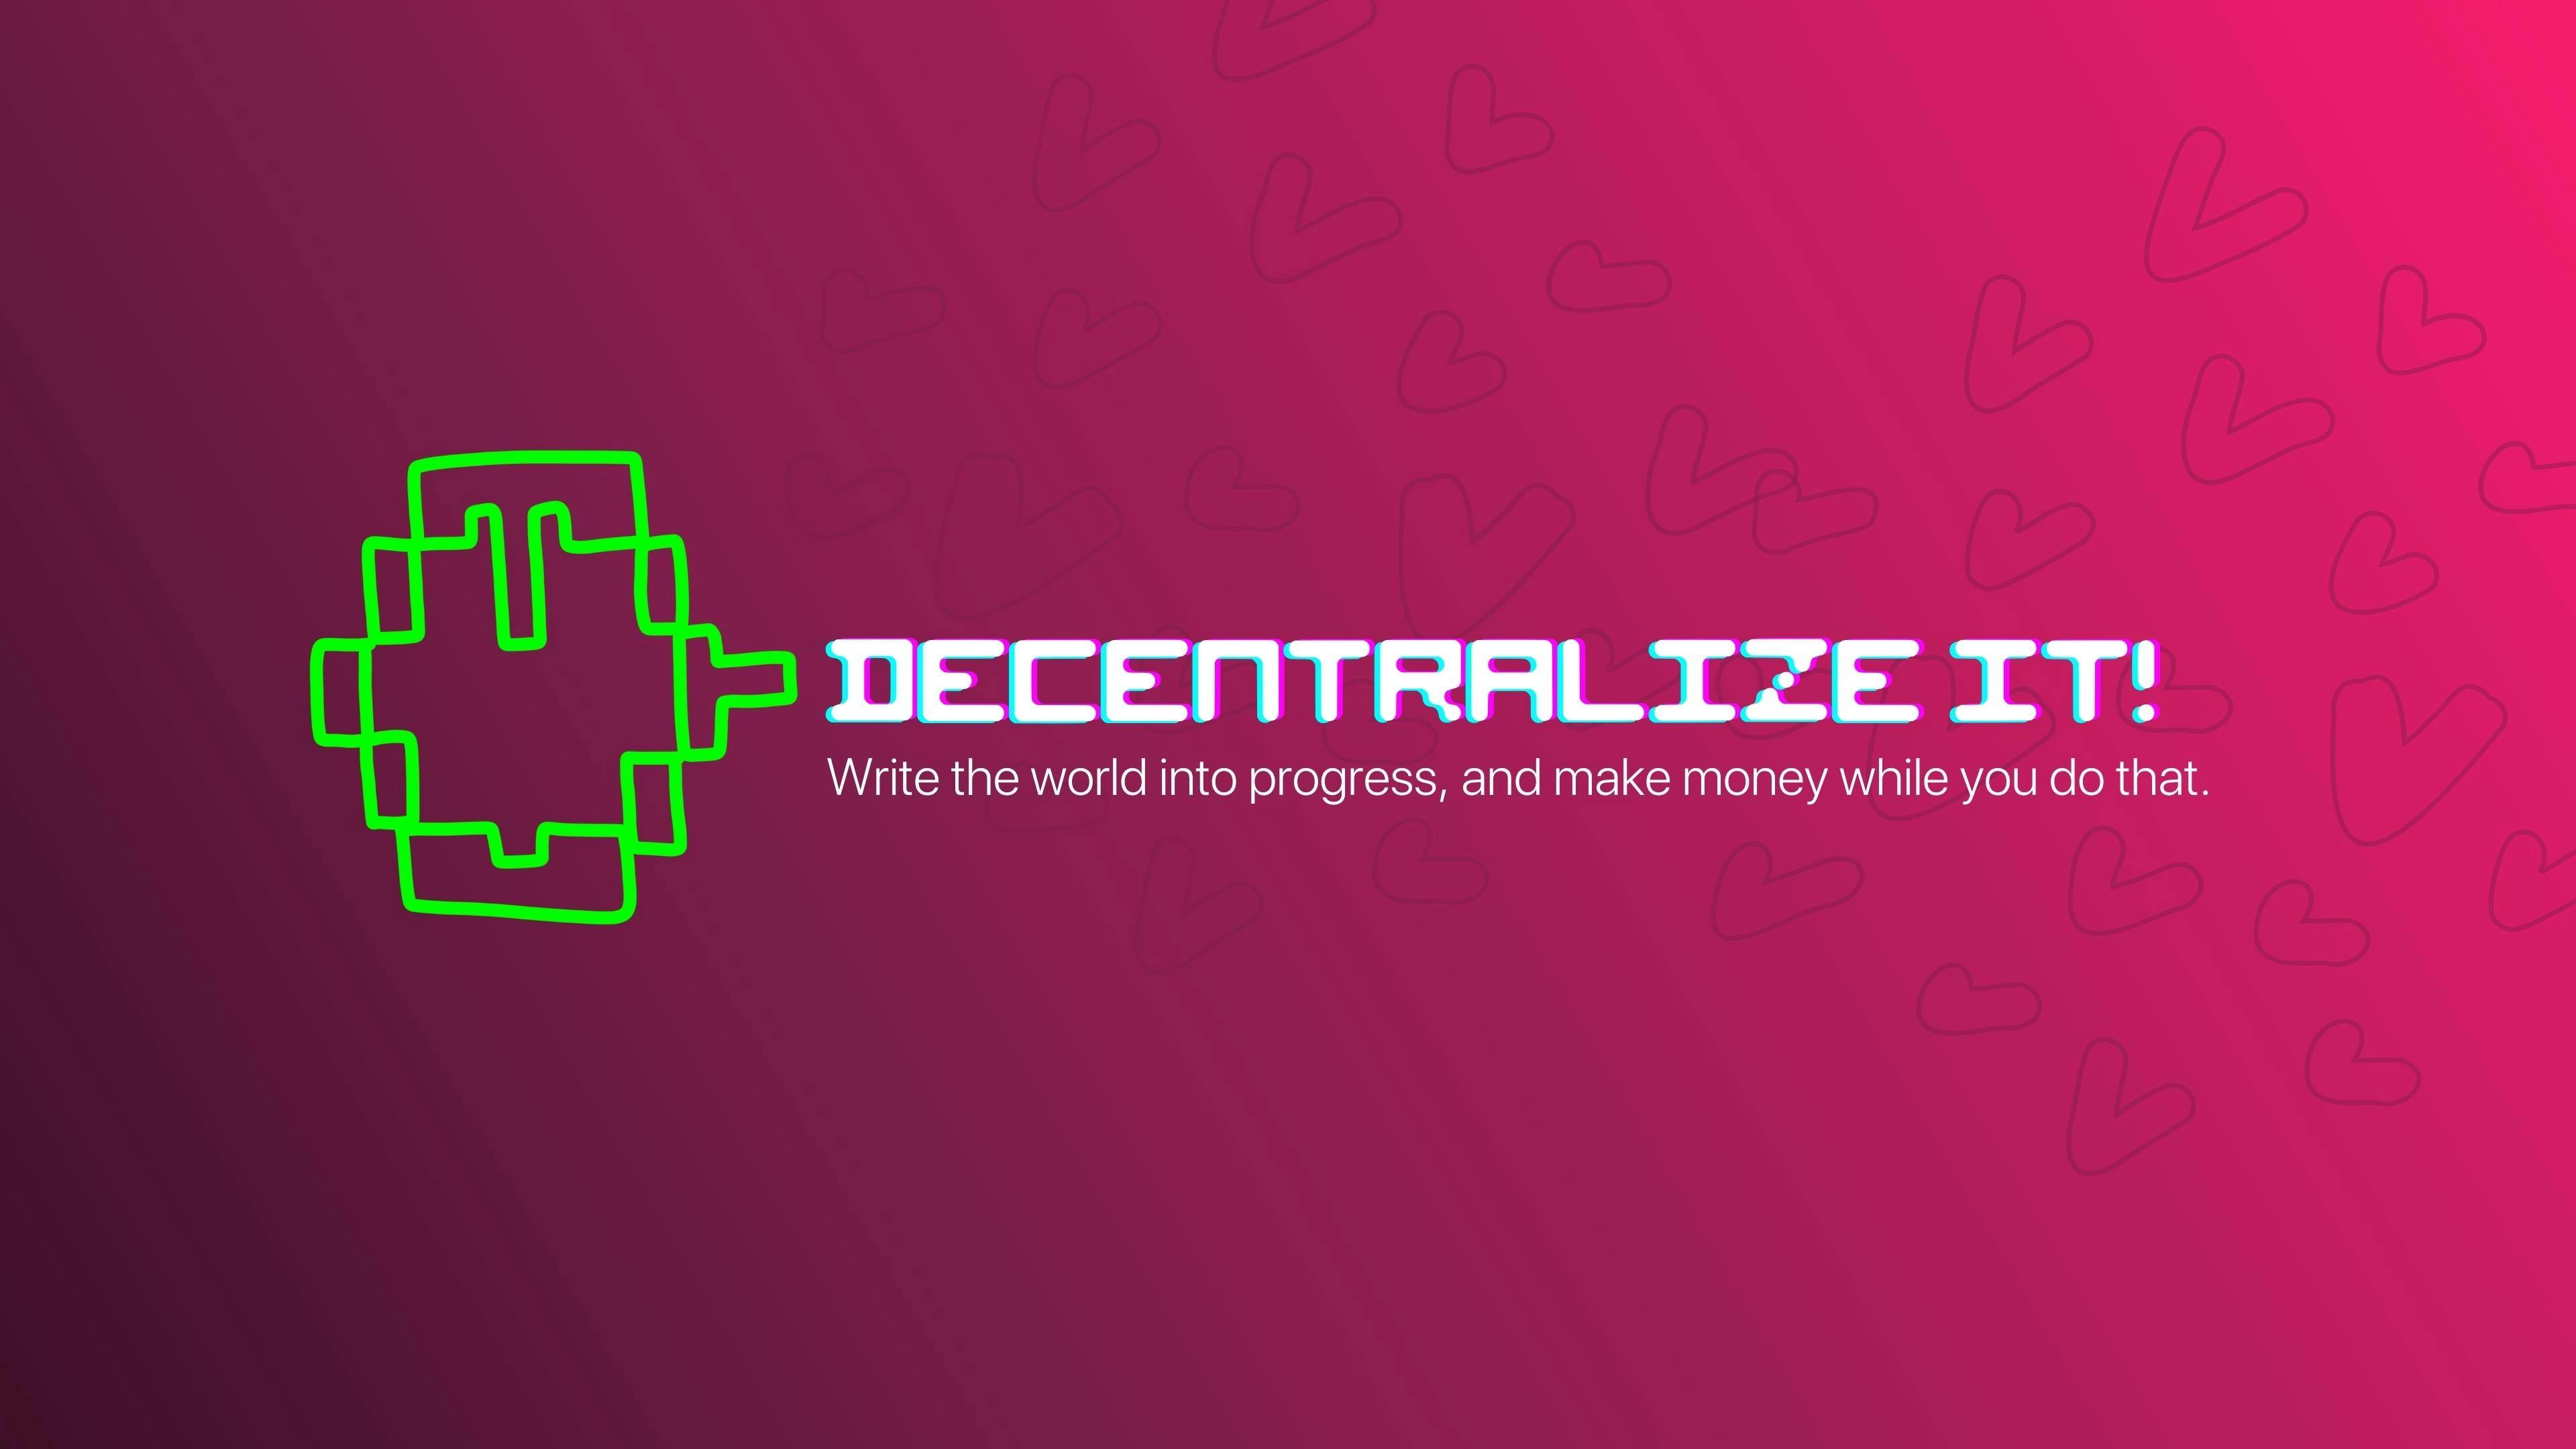 featured image - Make Money by Writing About the Decentralized Internet!